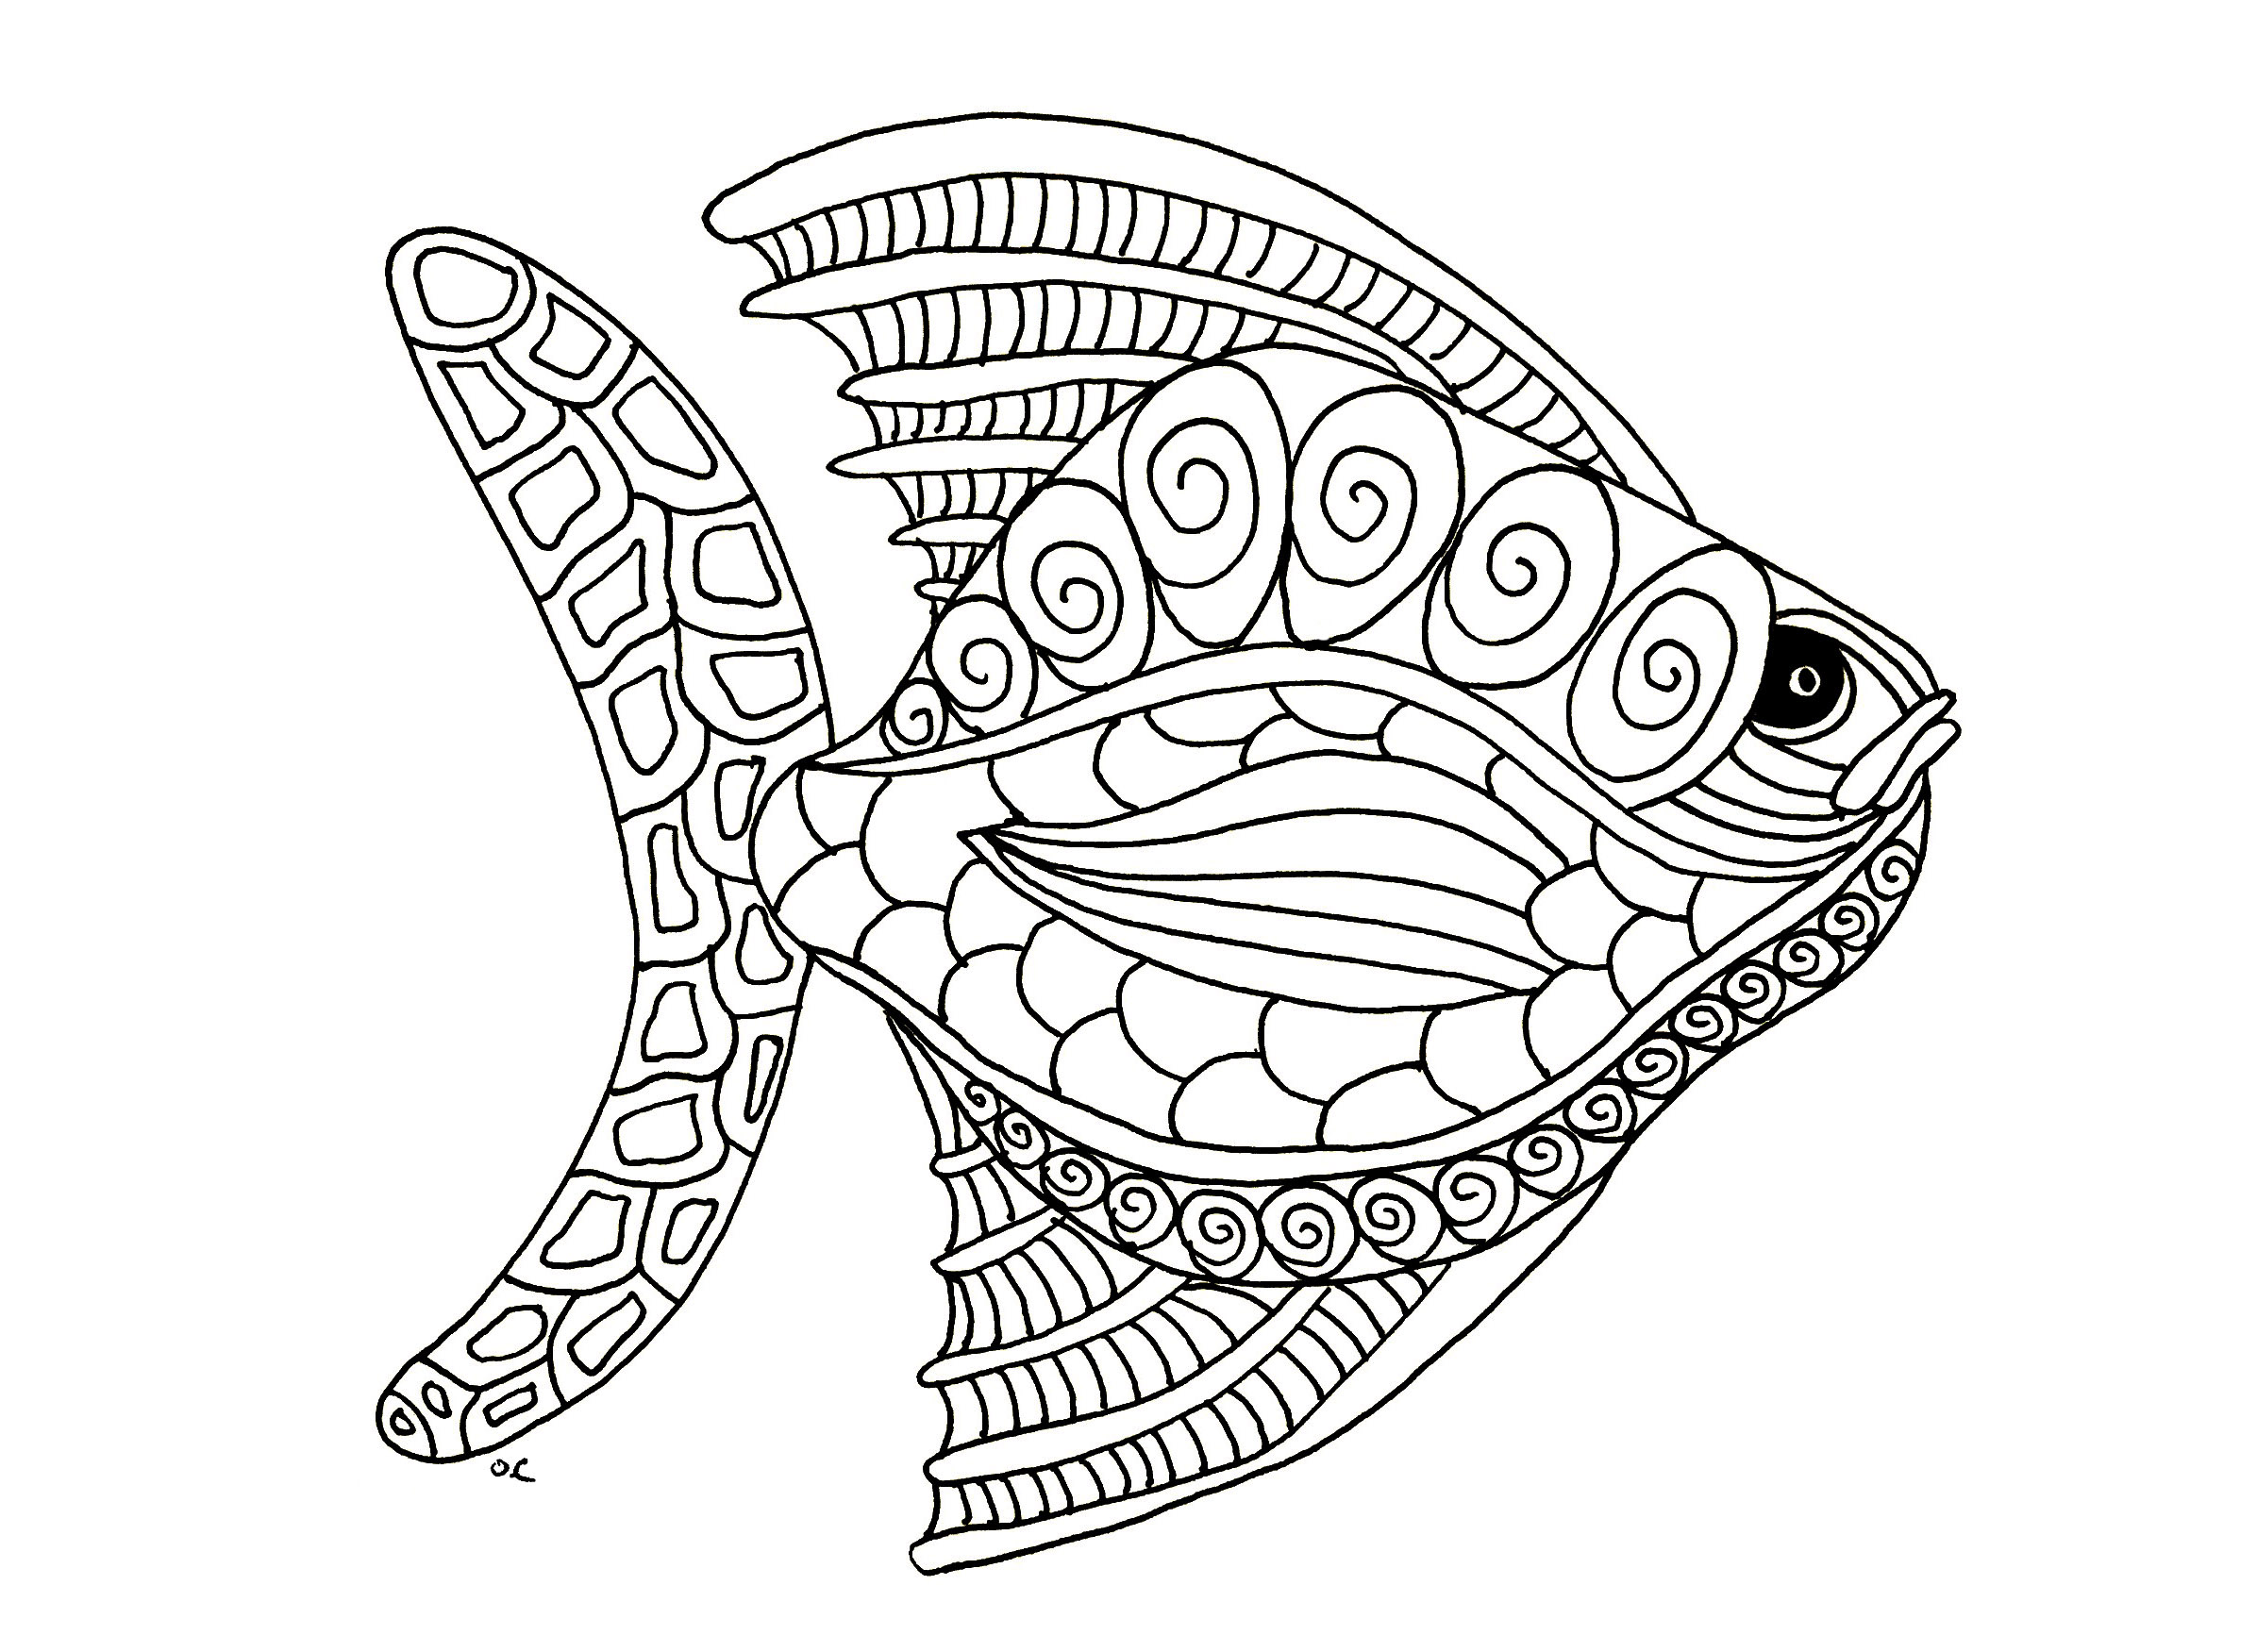 fish-zentangle-step-1-fishes-adult-coloring-pages